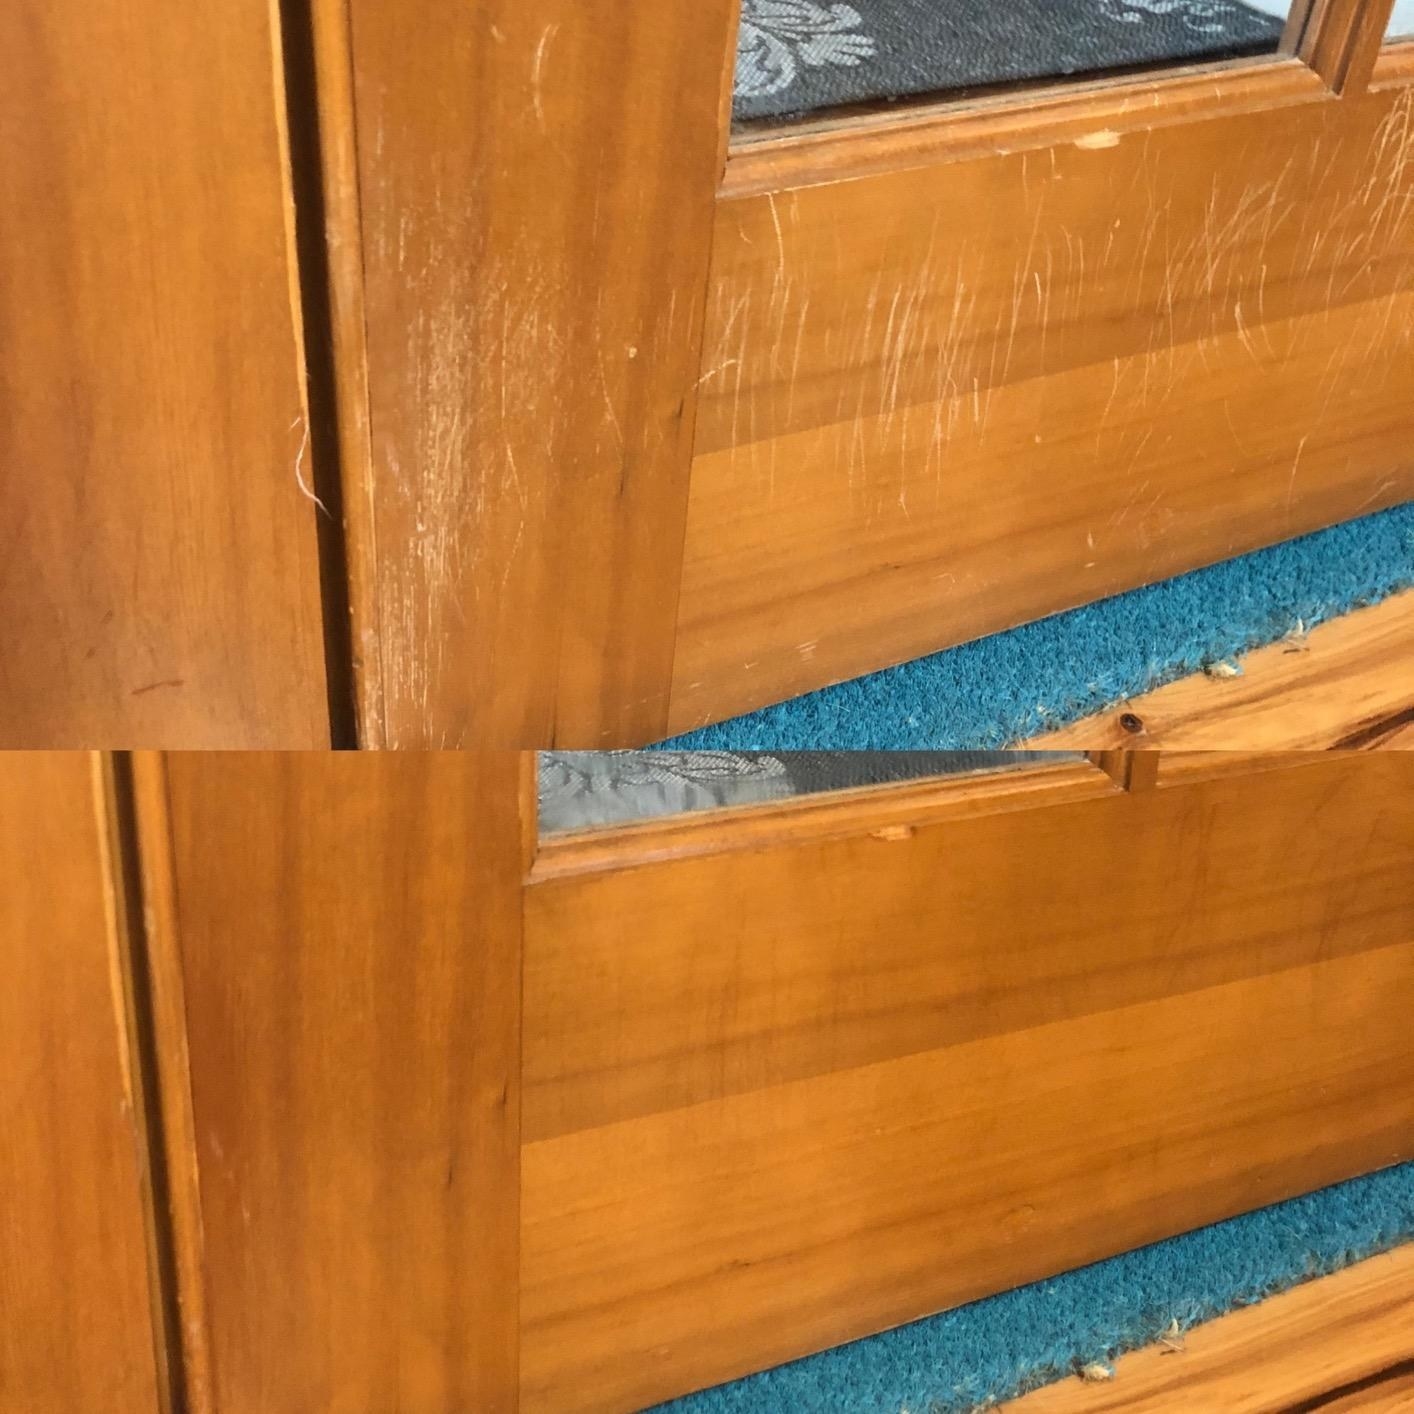 Review photo of before and after the wood polish and conditioner